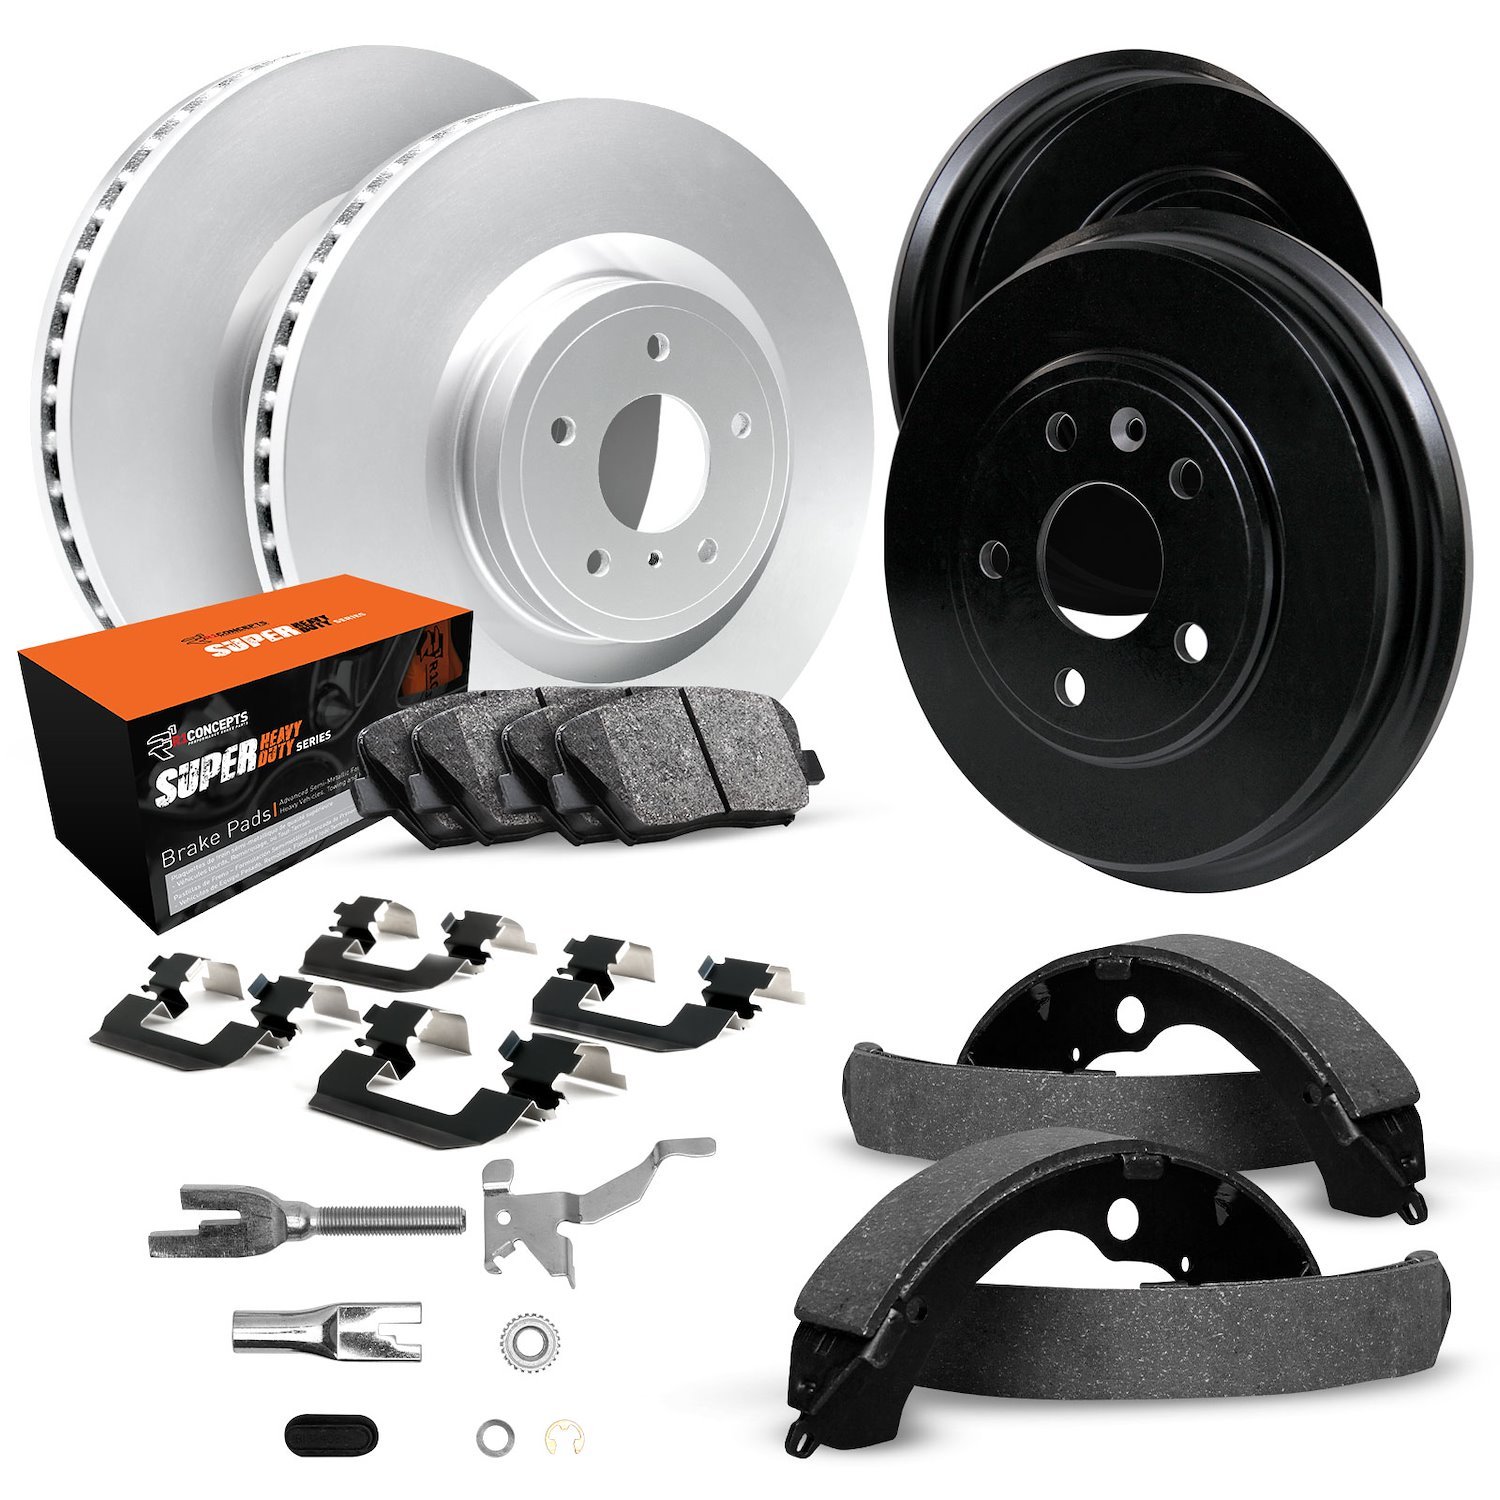 GEO-Carbon Brake Rotor & Drum Set w/Super-Duty Pads, Shoes, Hardware/Adjusters, 1971-1976 GM, Position: Front & Rear